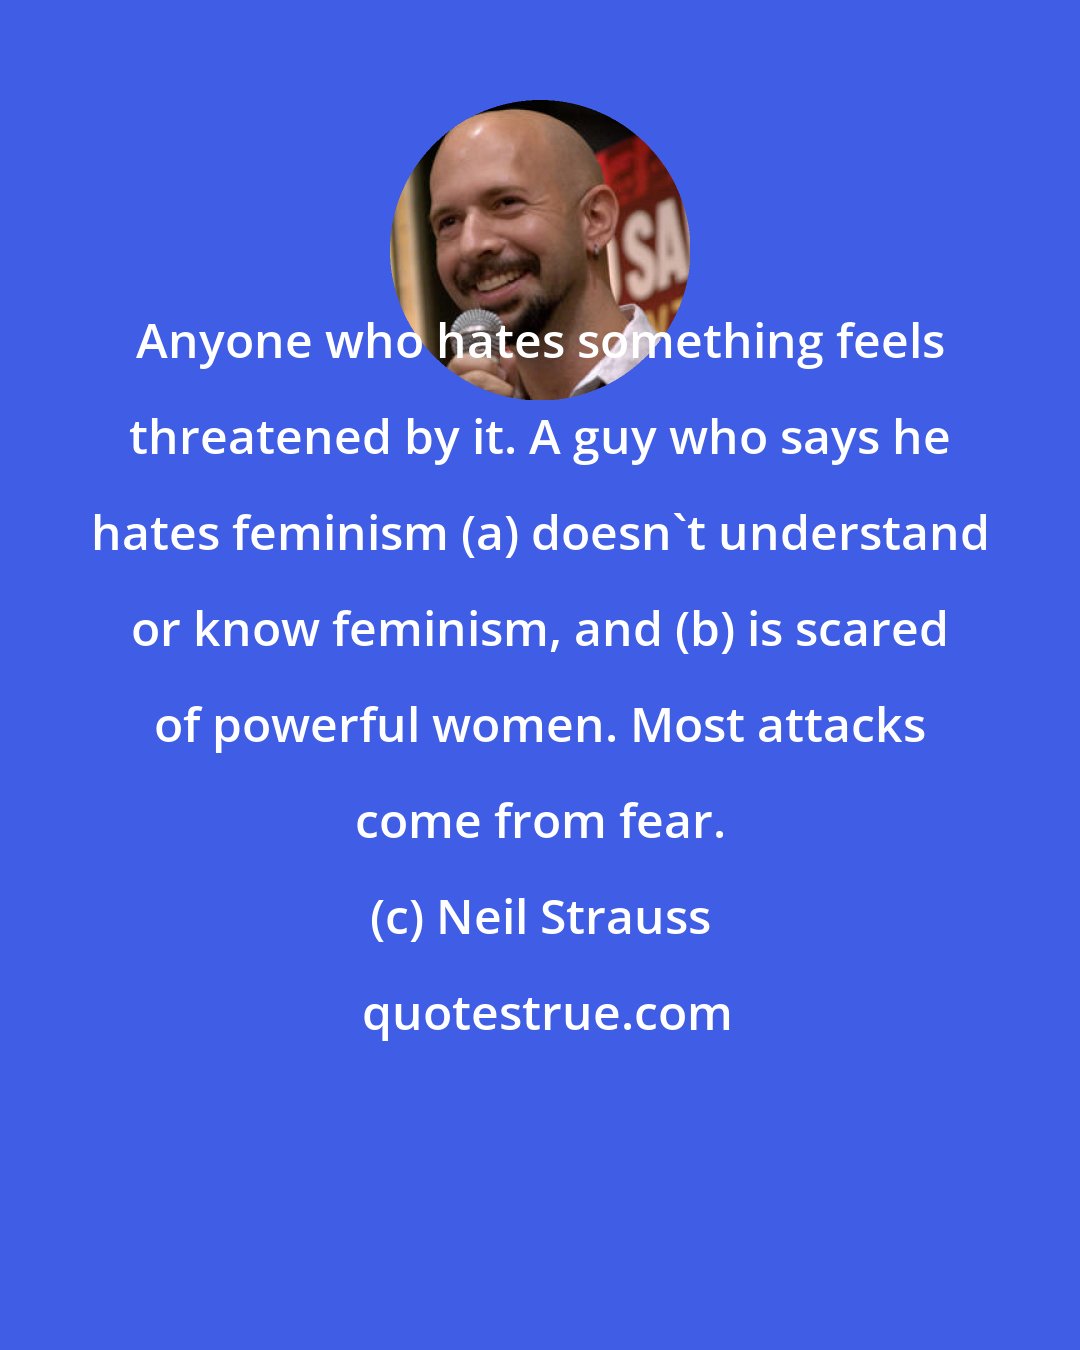 Neil Strauss: Anyone who hates something feels threatened by it. A guy who says he hates feminism (a) doesn't understand or know feminism, and (b) is scared of powerful women. Most attacks come from fear.